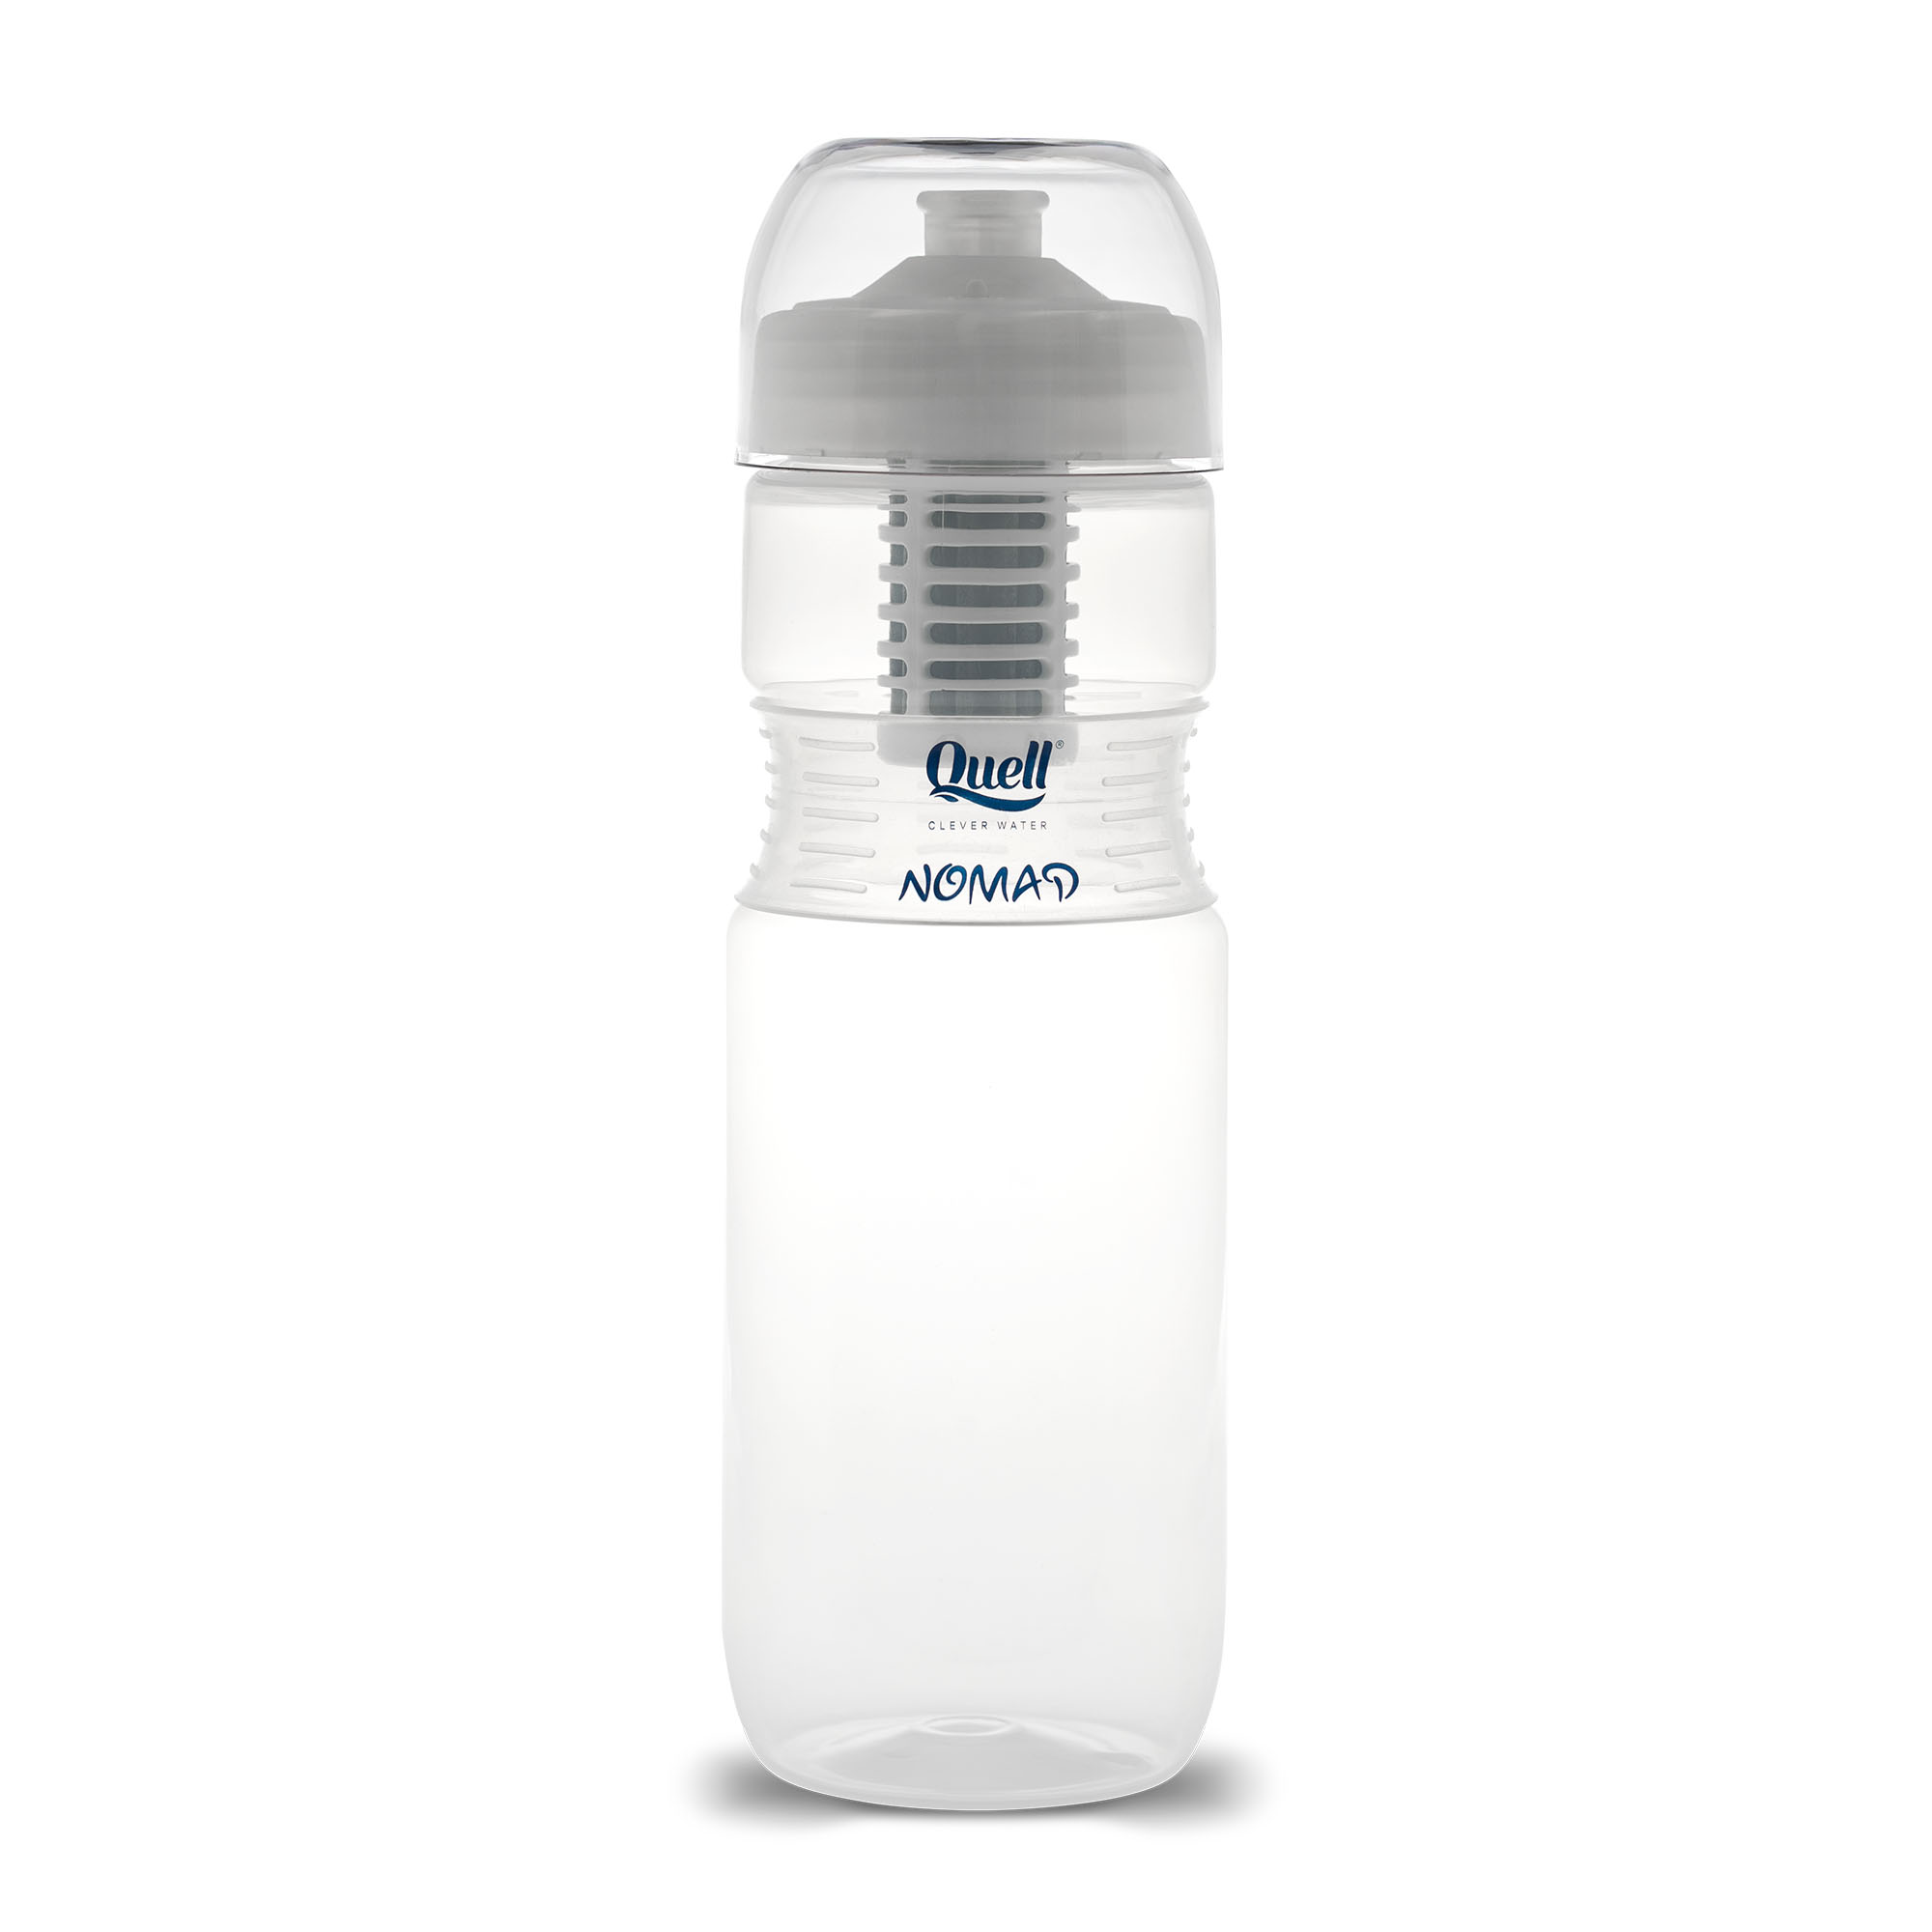 Quell NOMAD filter bottle – test 1 and 2